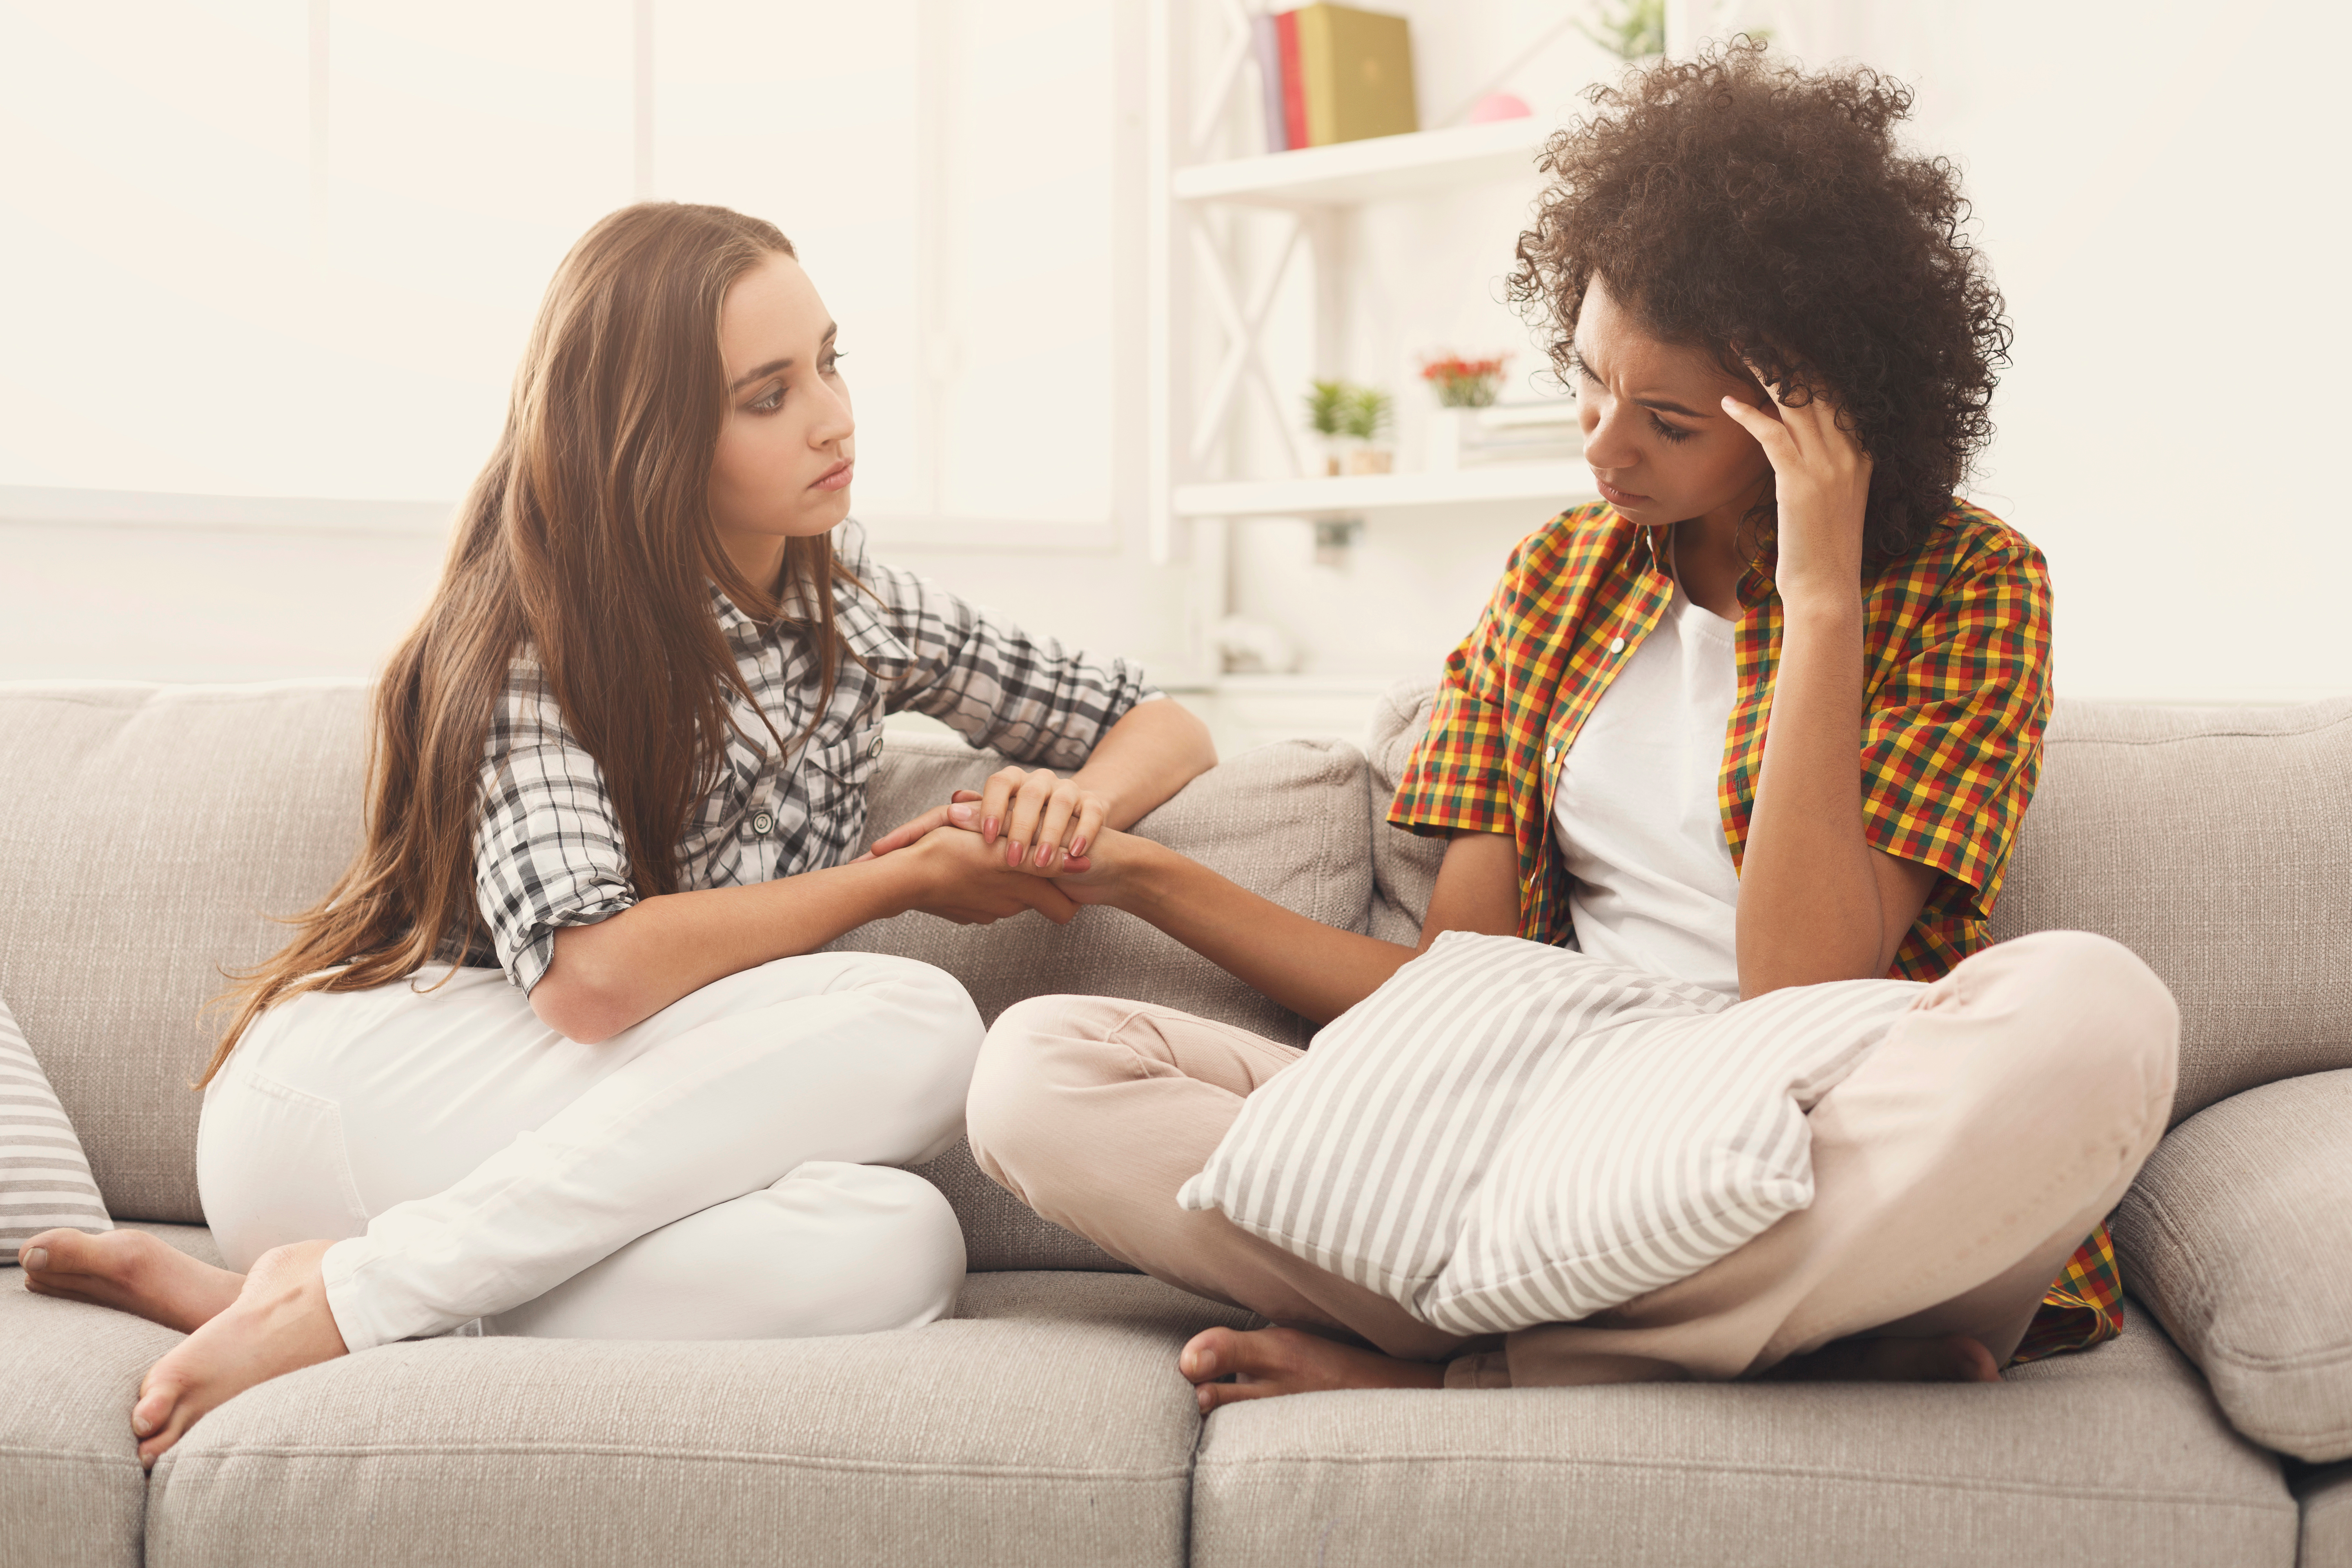 Two women are pictured talking and comforting each other | Source: Shutterstock